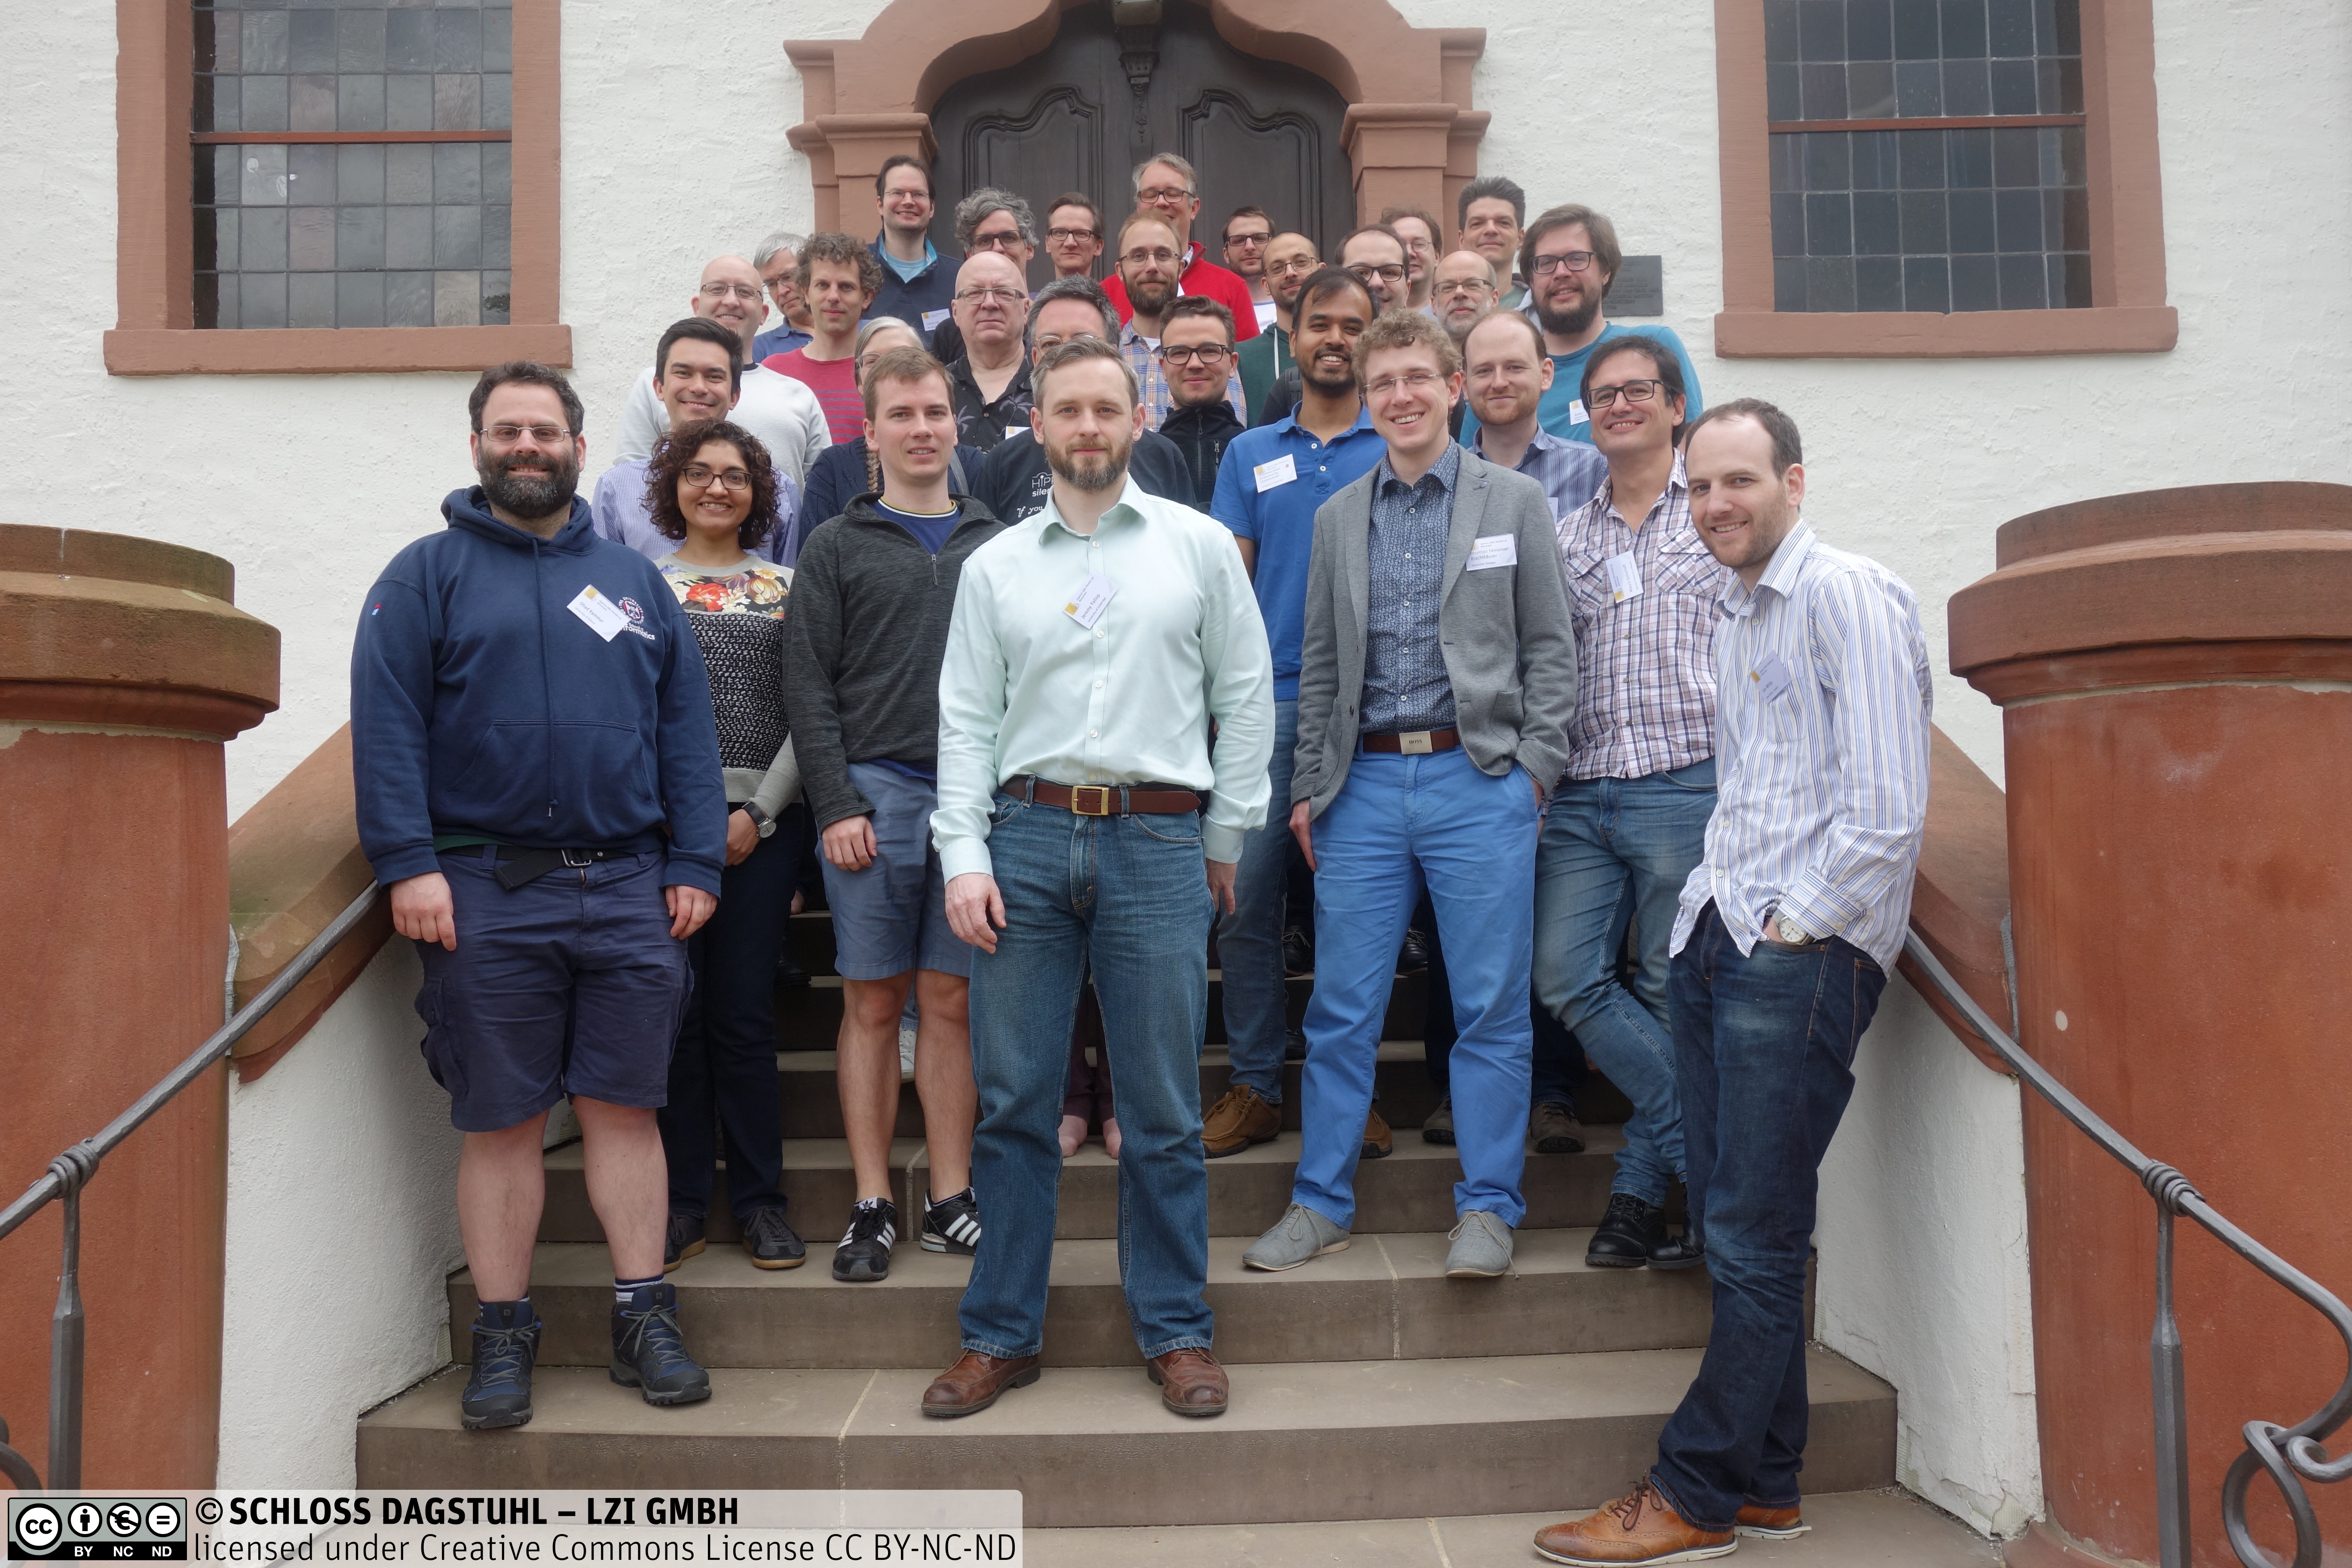 Group photo of the participants of the Dagstuhl Seminar.